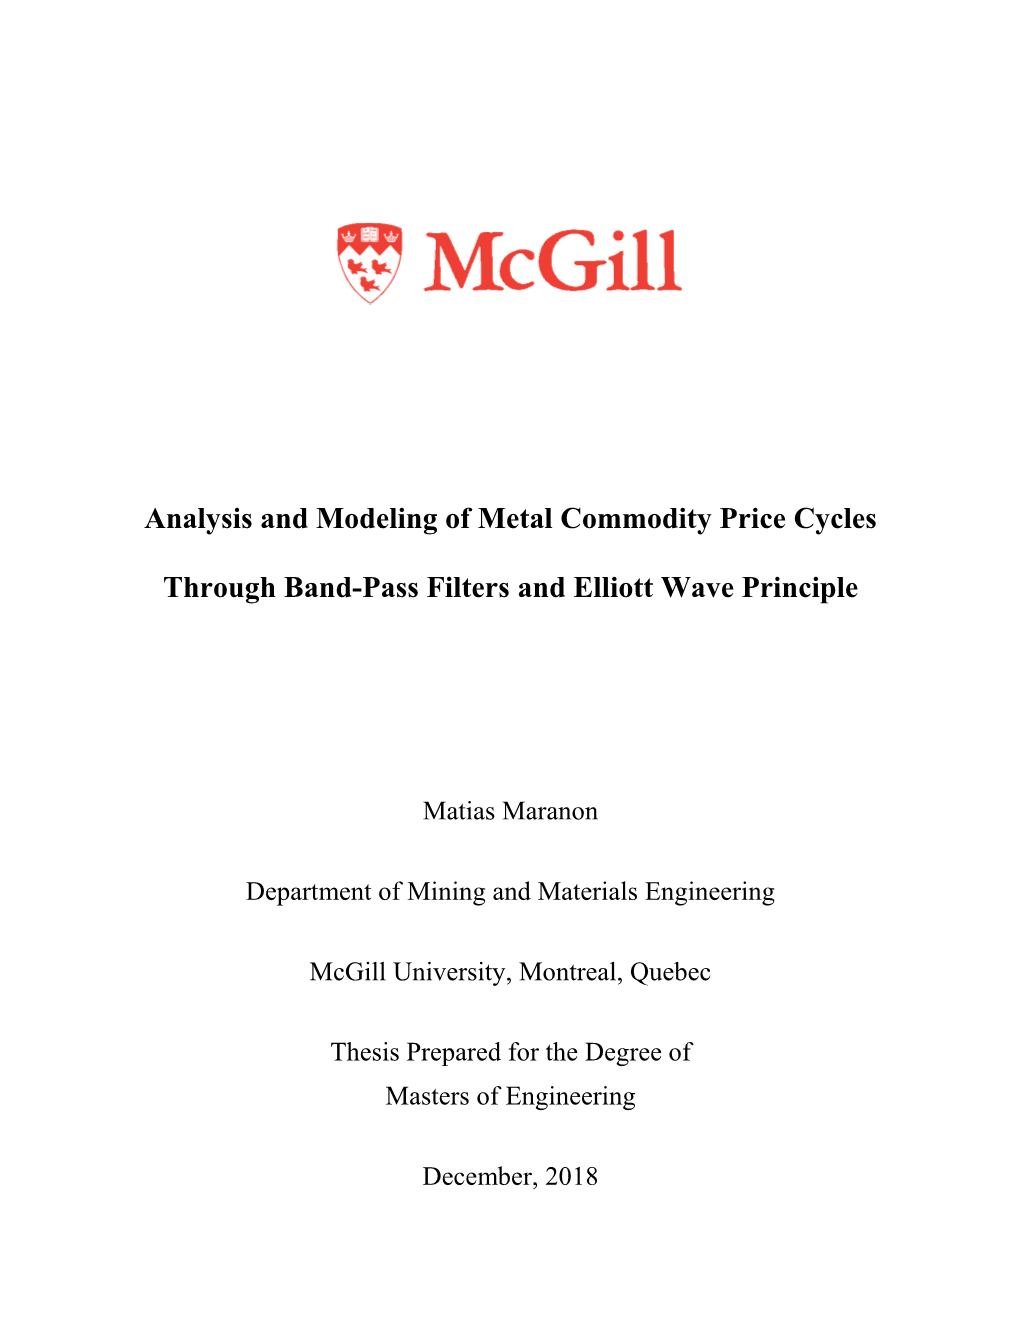 Analysis and Modeling of Metal Commodity Price Cycles Through